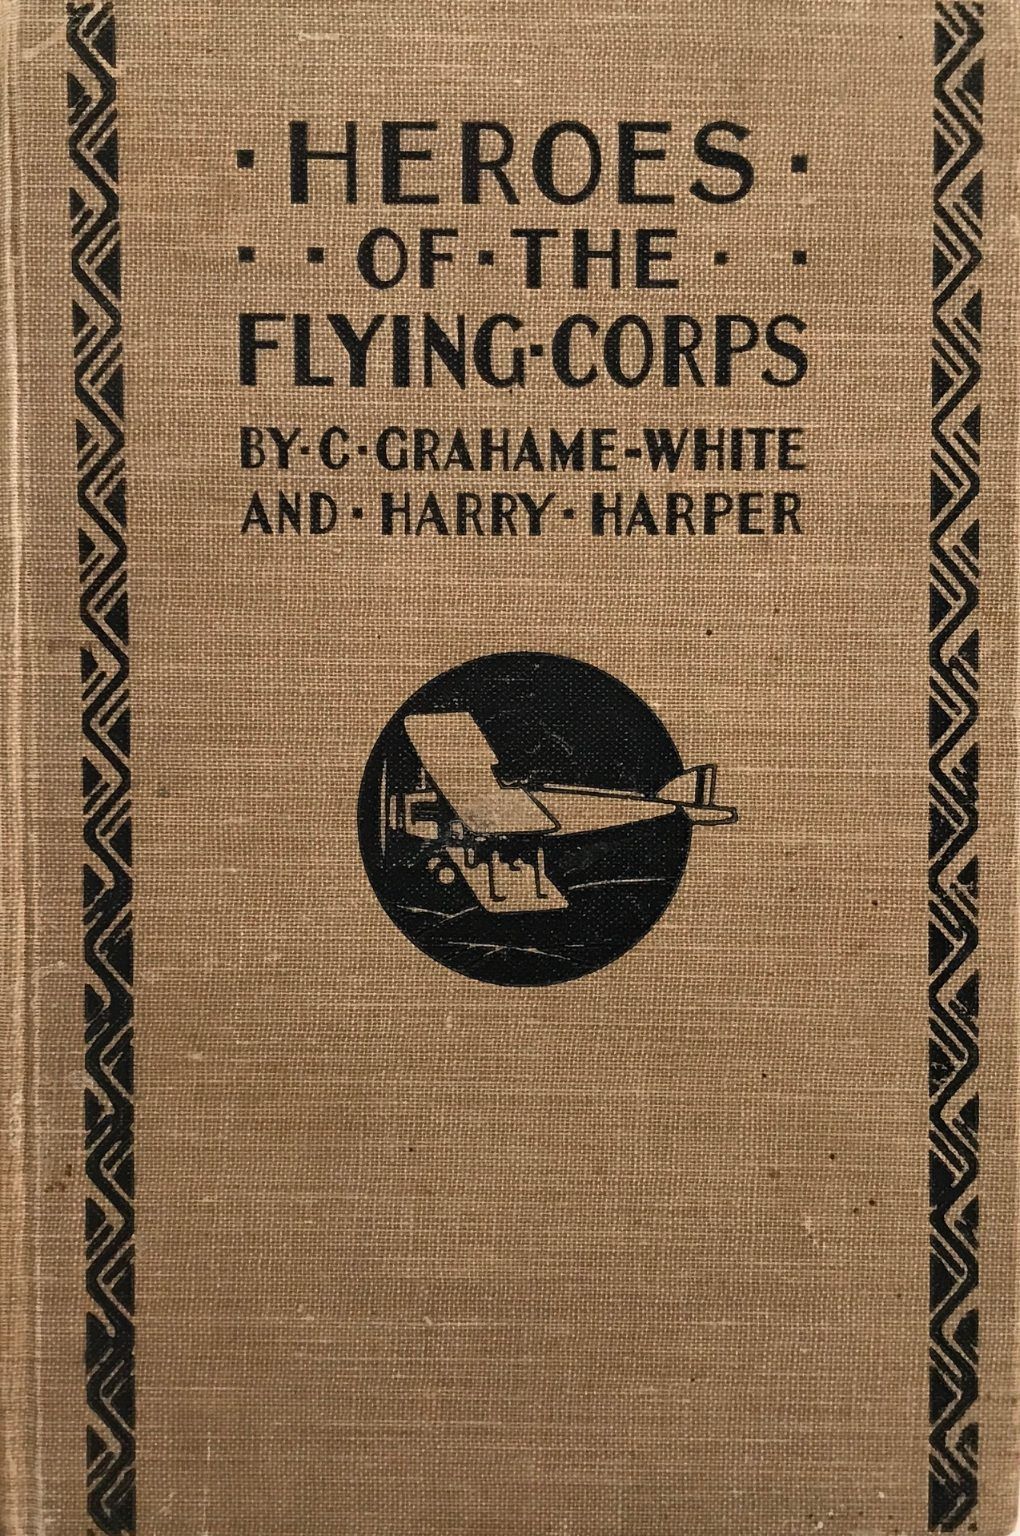 HEROES OF THE FLYING CORPS